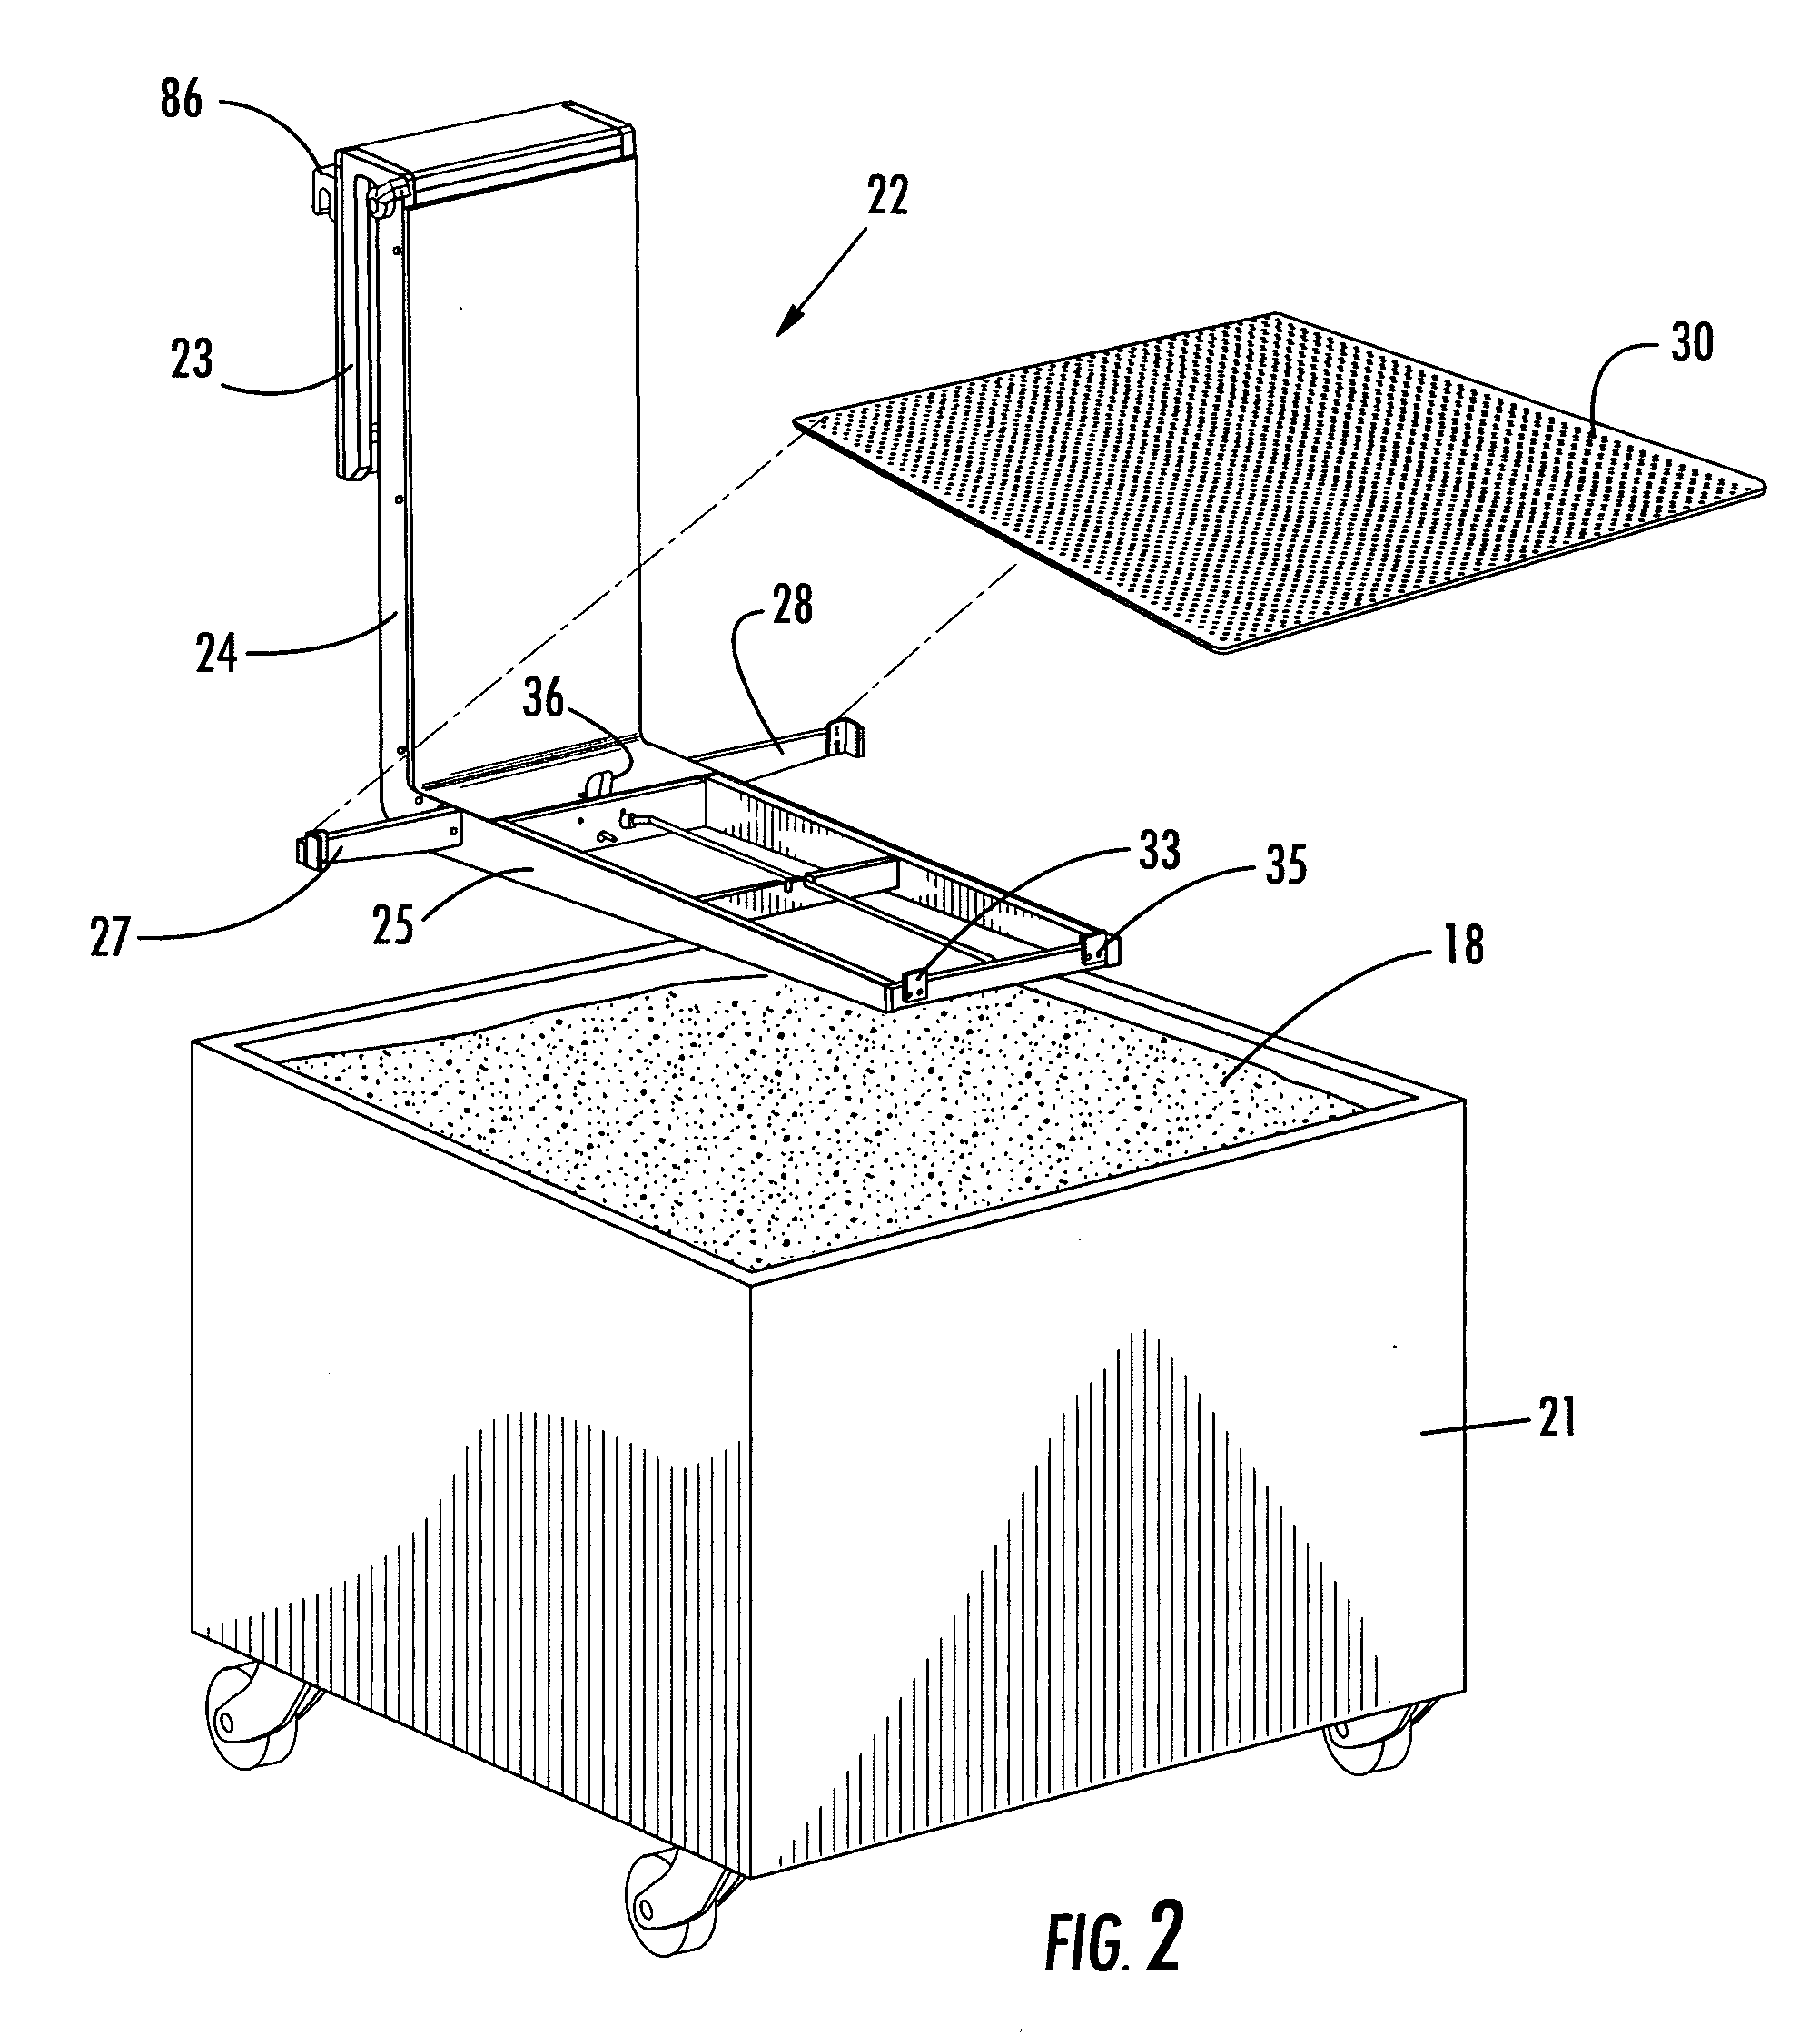 Rapid prototyping and manufacturing system and method